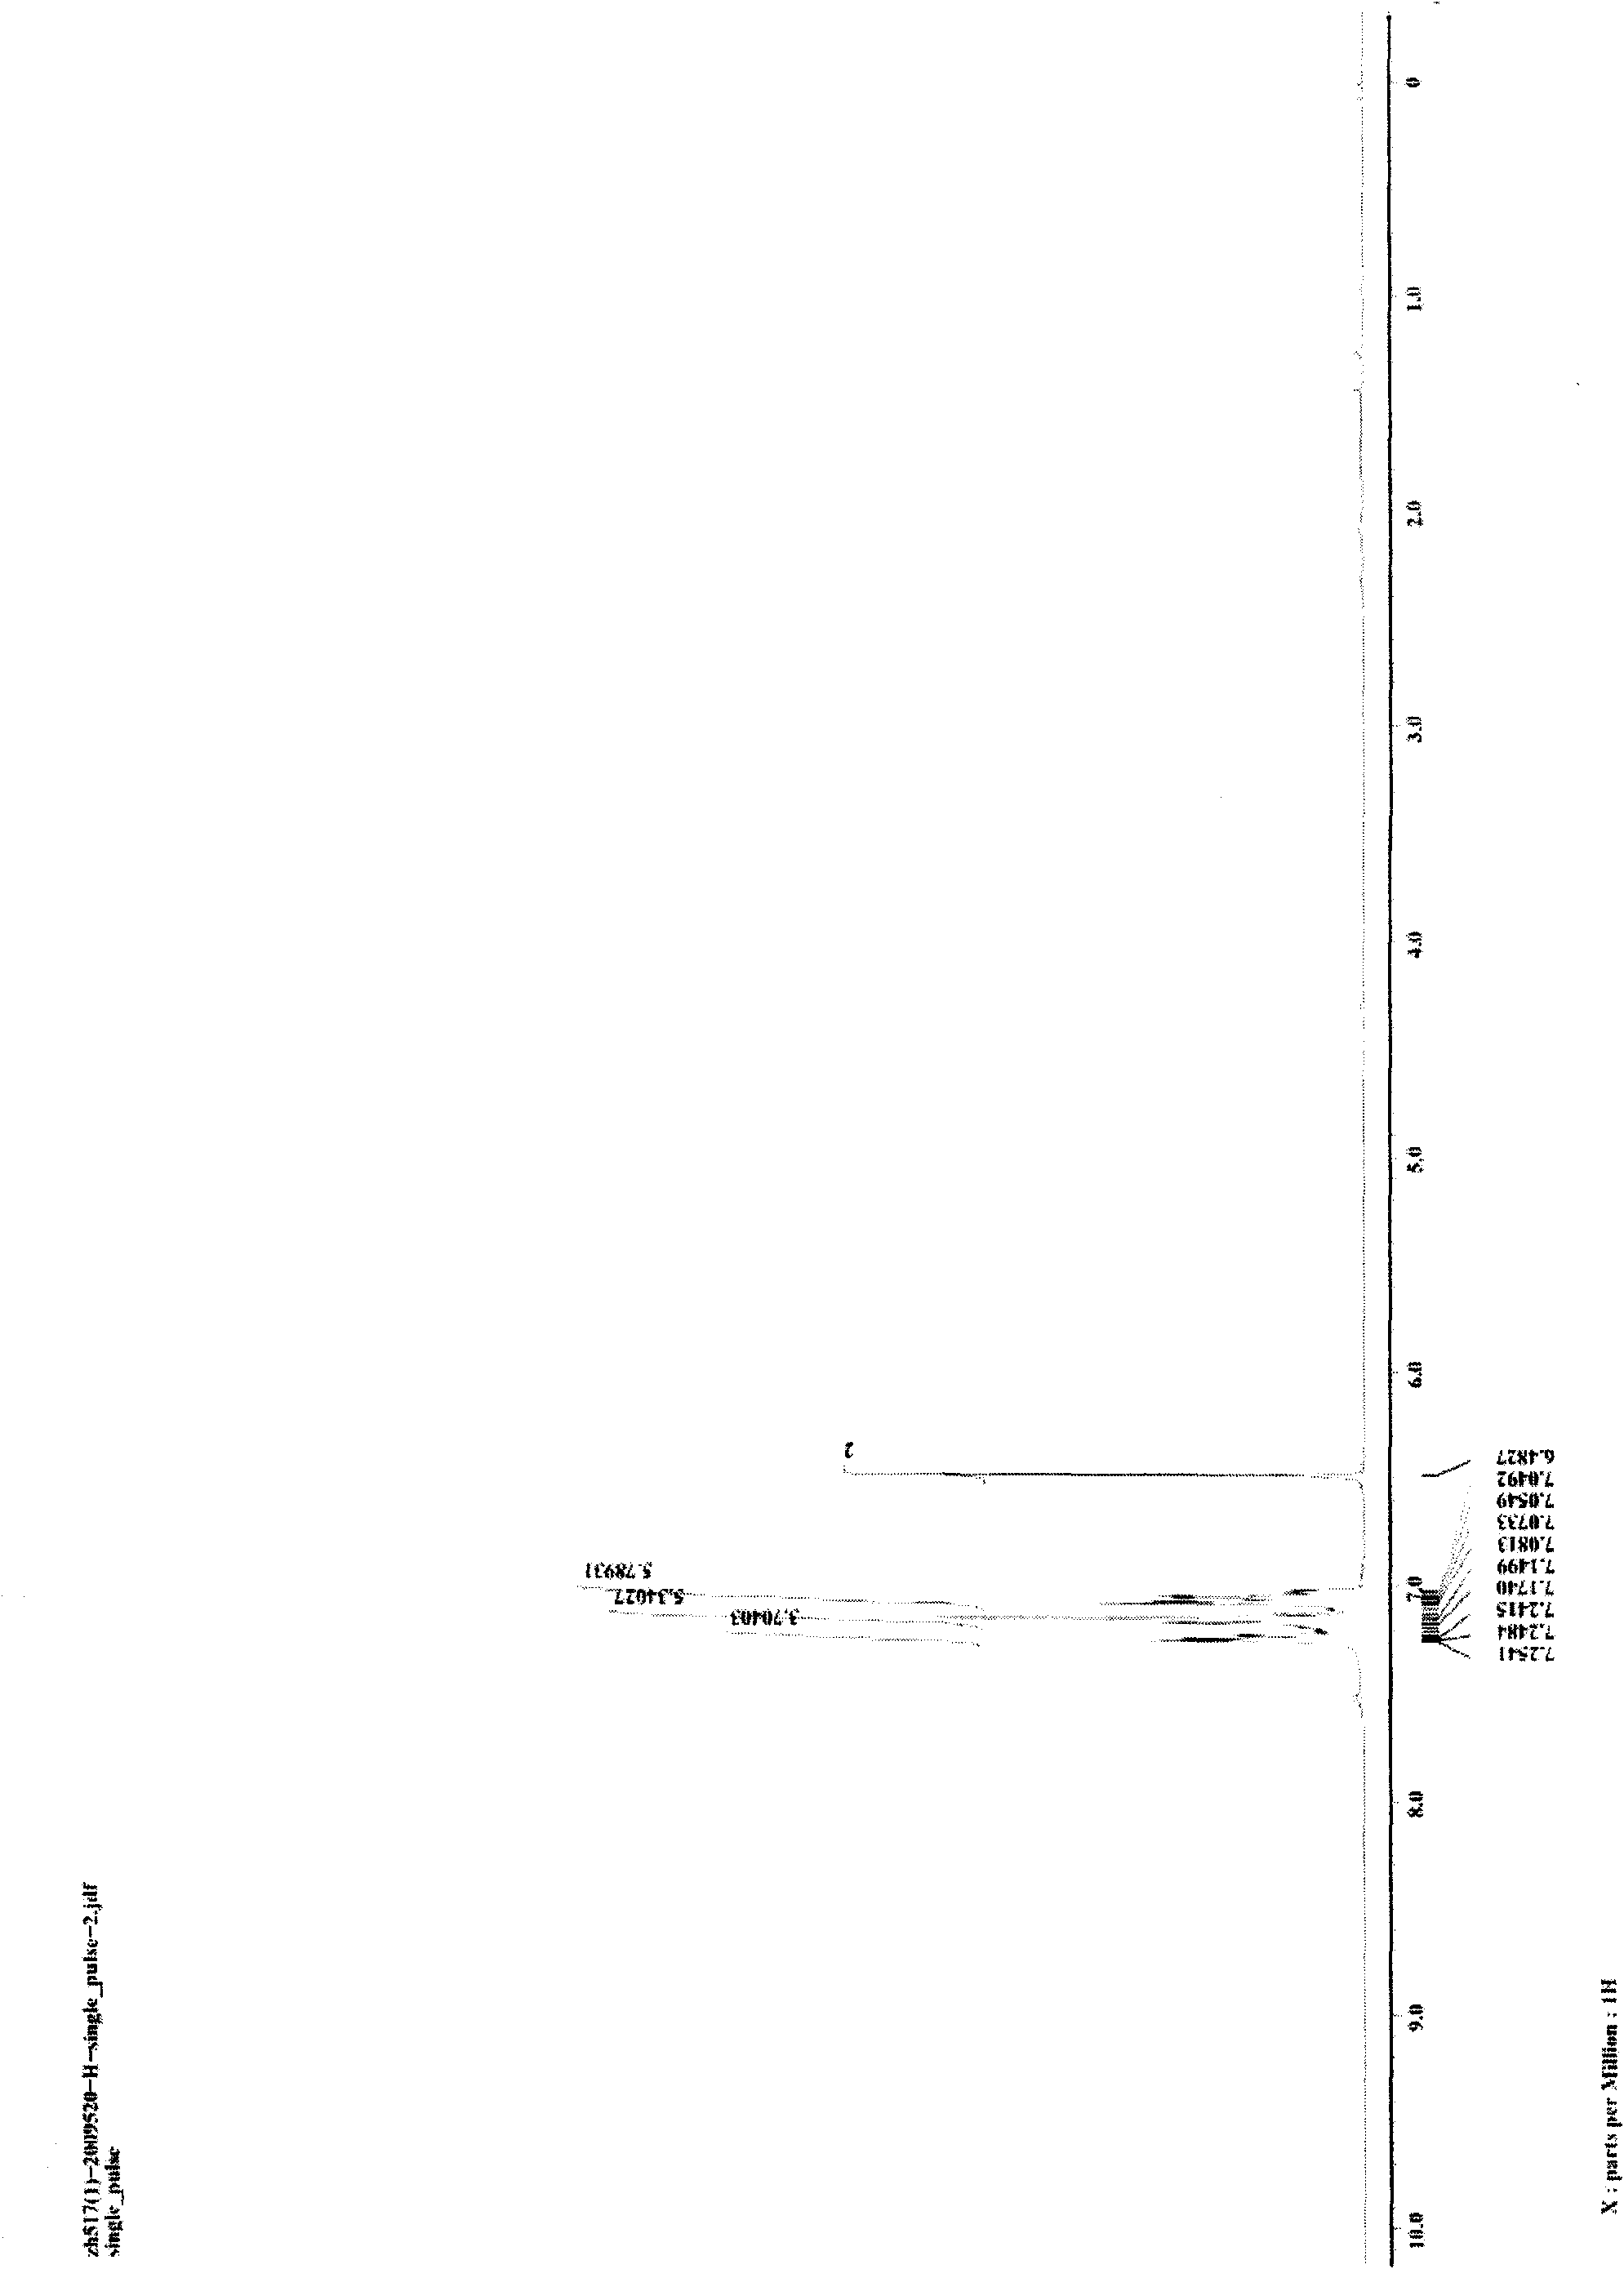 Method for synthesizing substituted pyrrole by cycloaddition reaction of 1, 3-diyne and primary amine